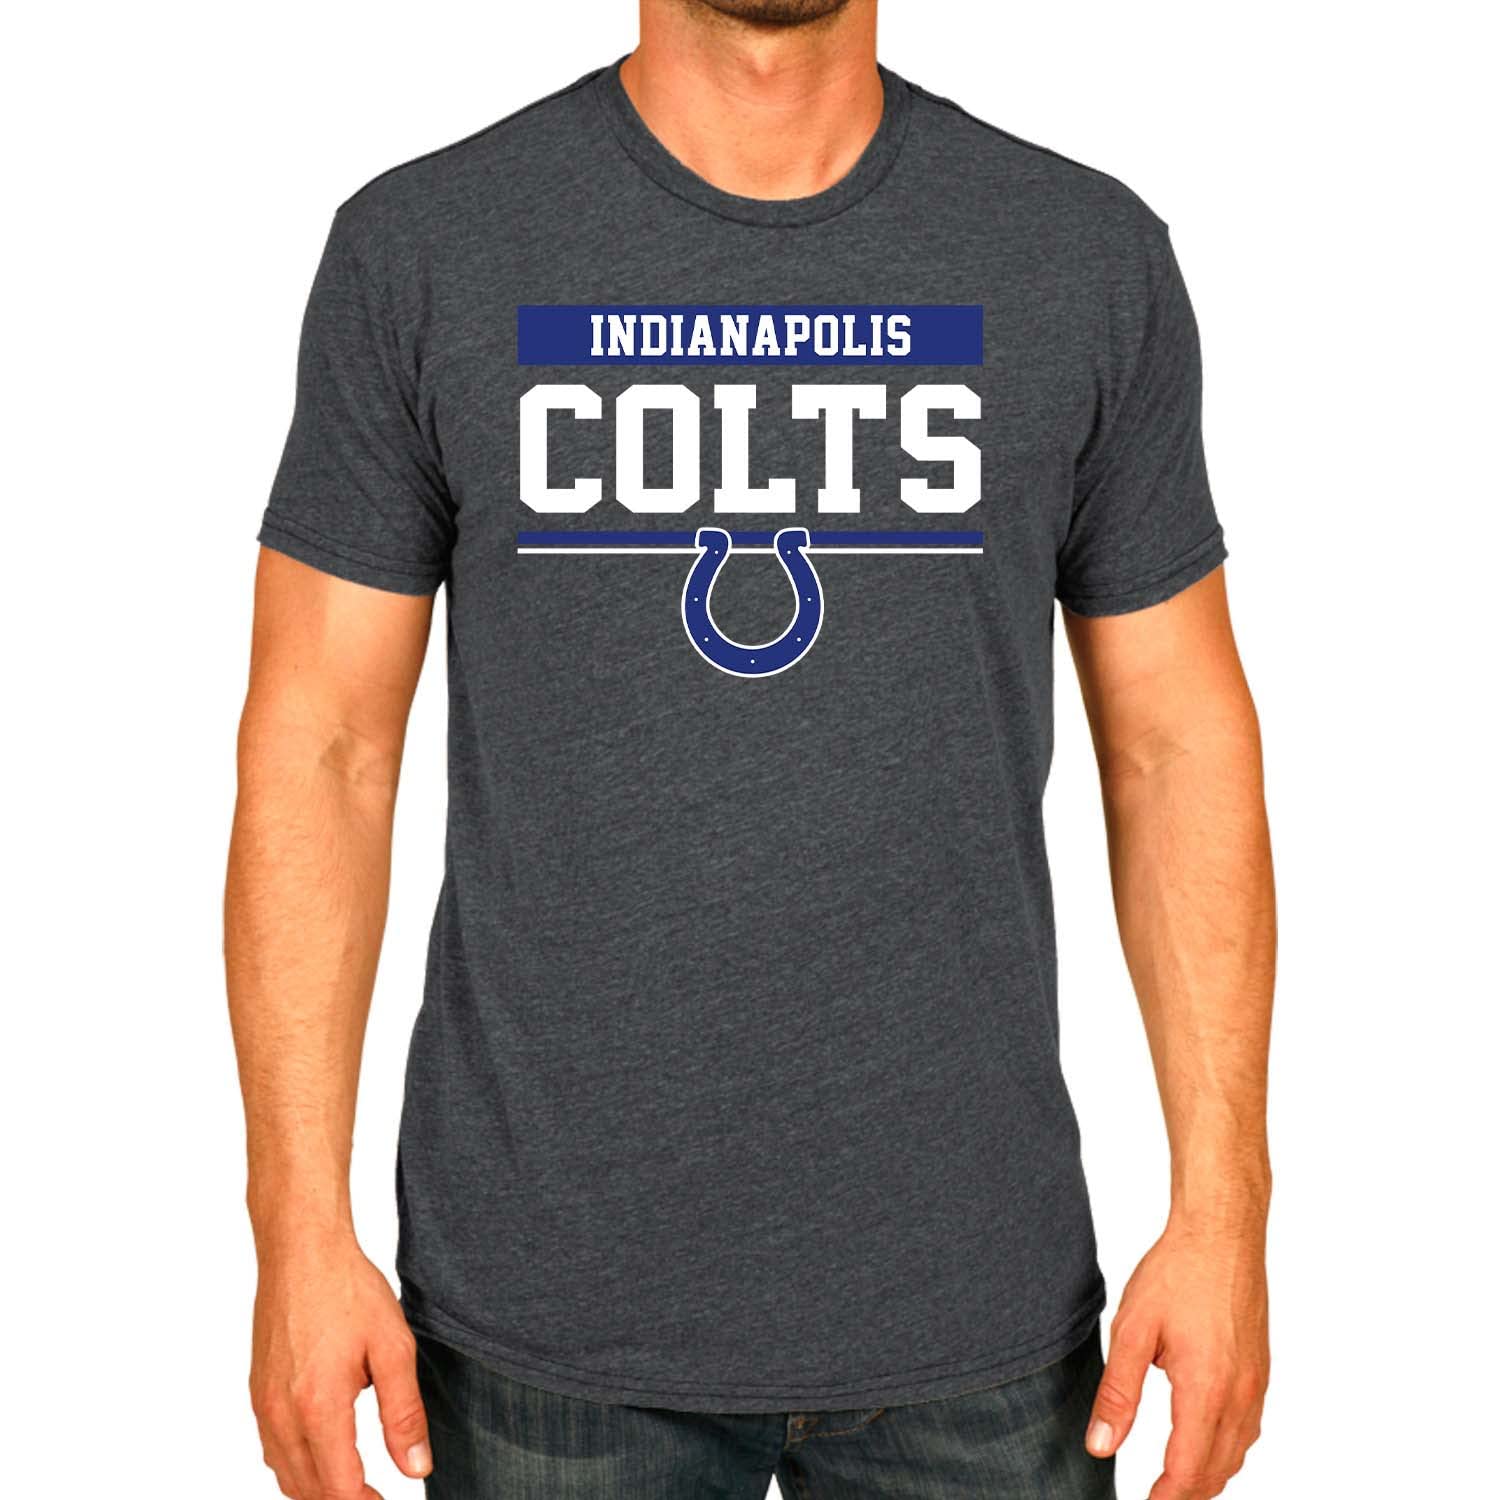 Team Fan Apparel NFL Short Sleeve charcoal T Shirt, Adult Sports Tee, Team  gear for Men and Women (Indianapolis colts - Black, Adult X-Large)